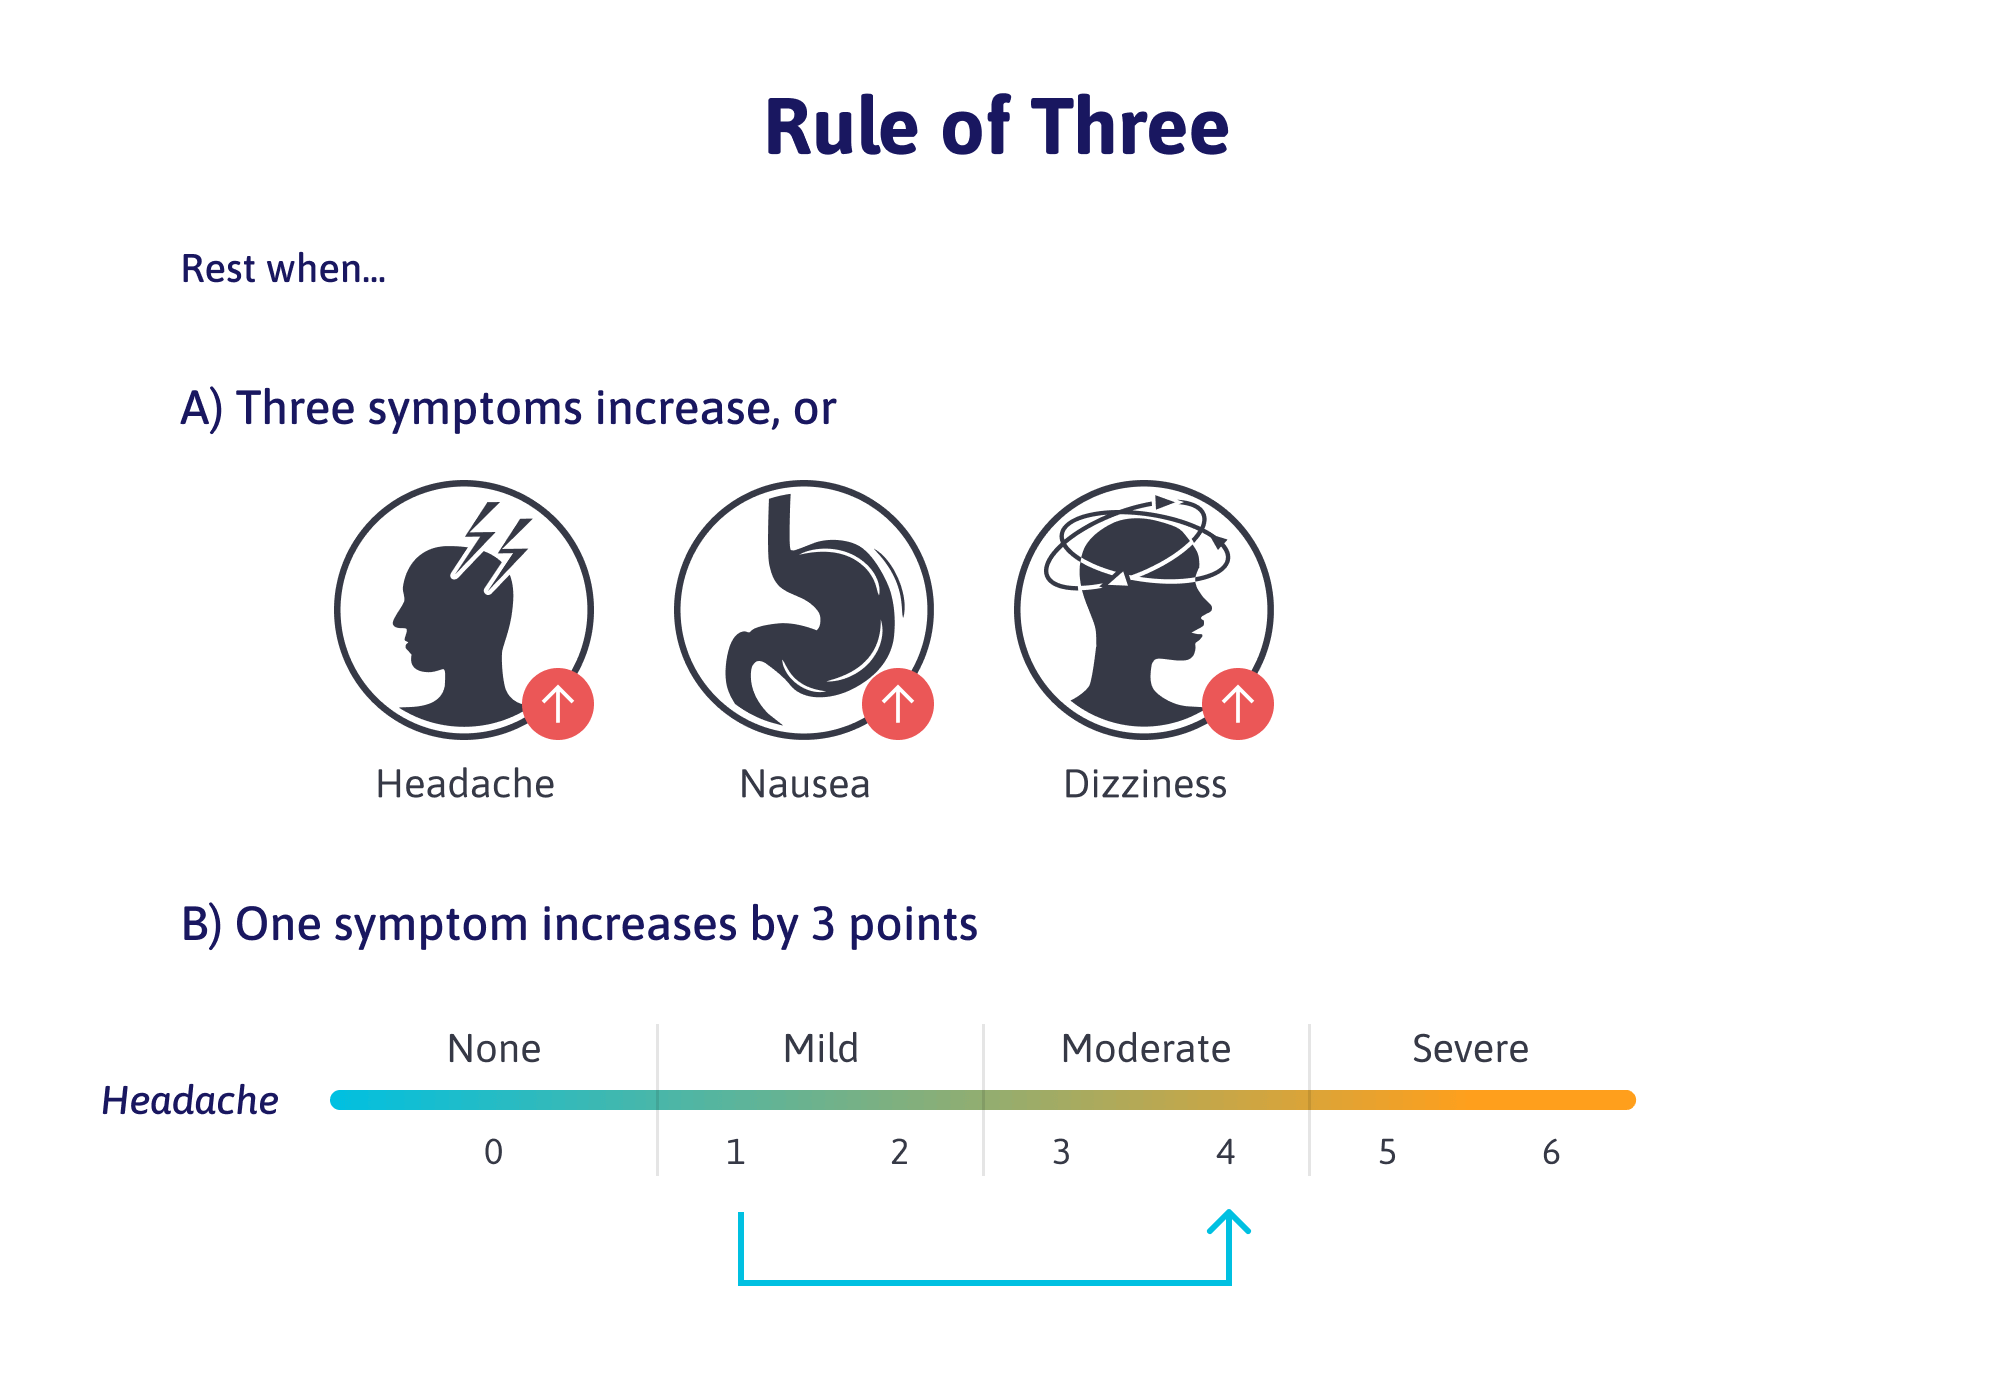 Rest when three symptoms increase or one symptom increases by three points.